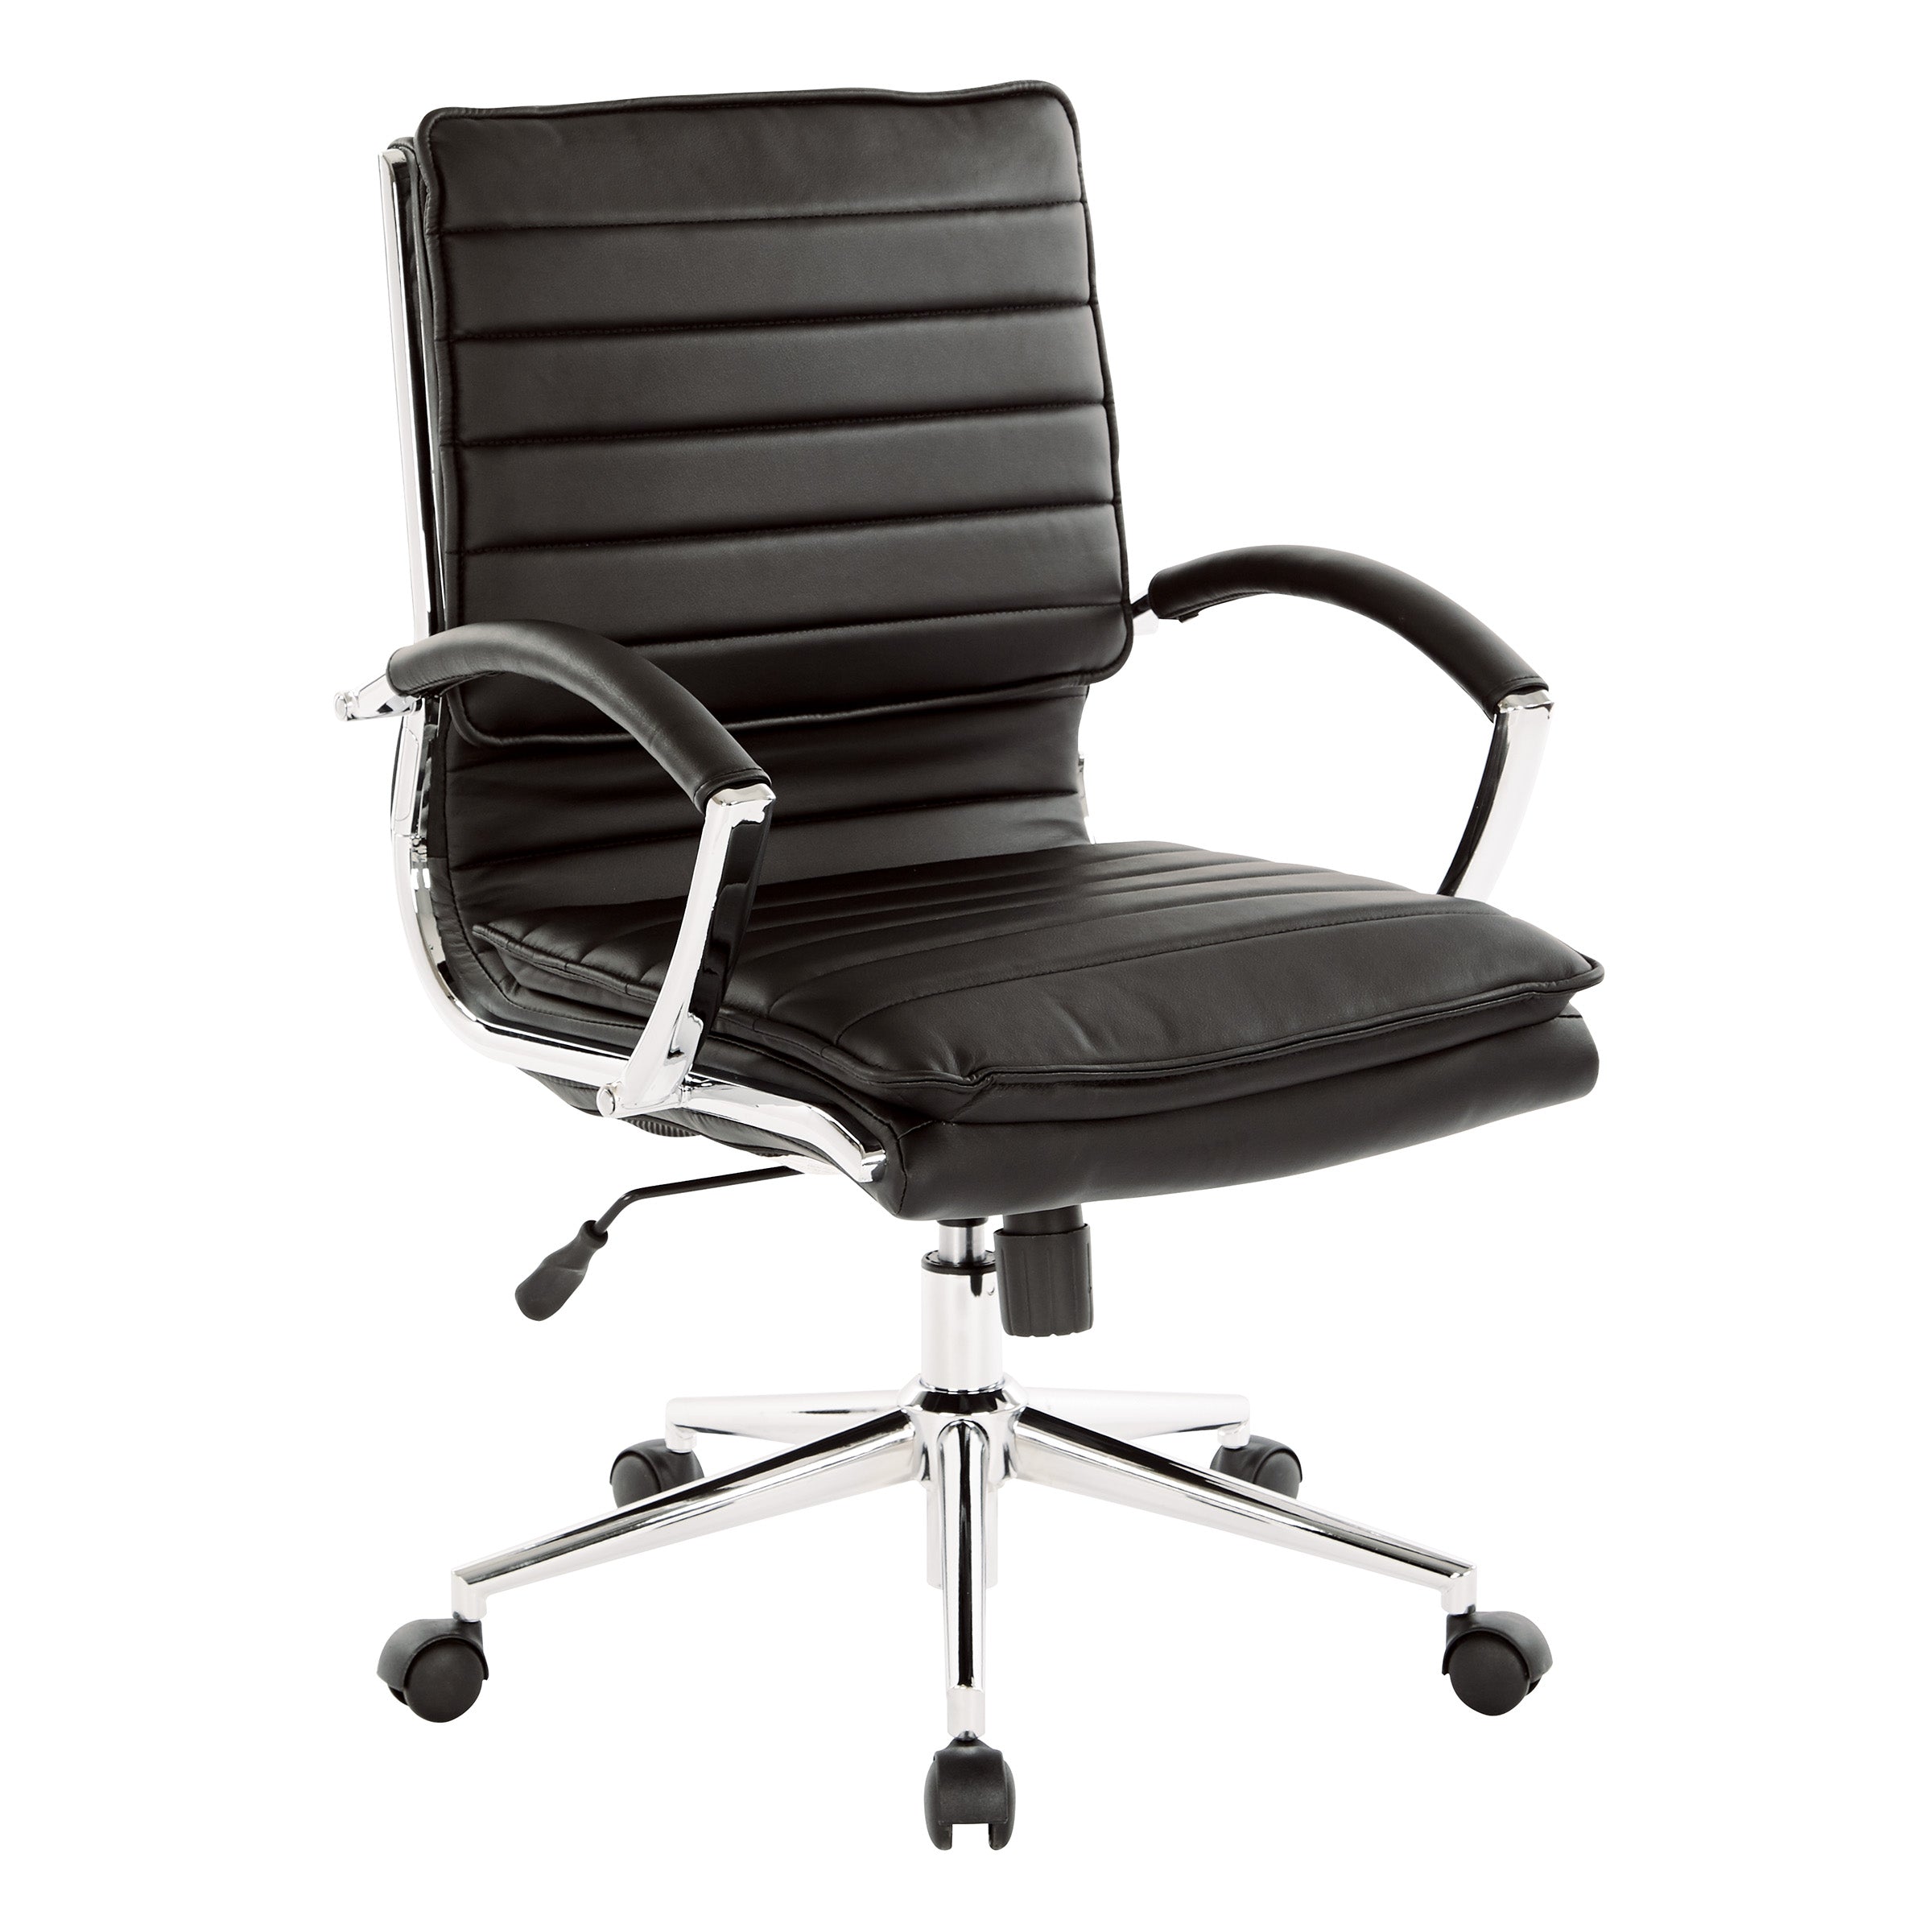 SPX23591C - Modern Mid-Back Faux Leather Chair w/ Chrome Base  by OSP